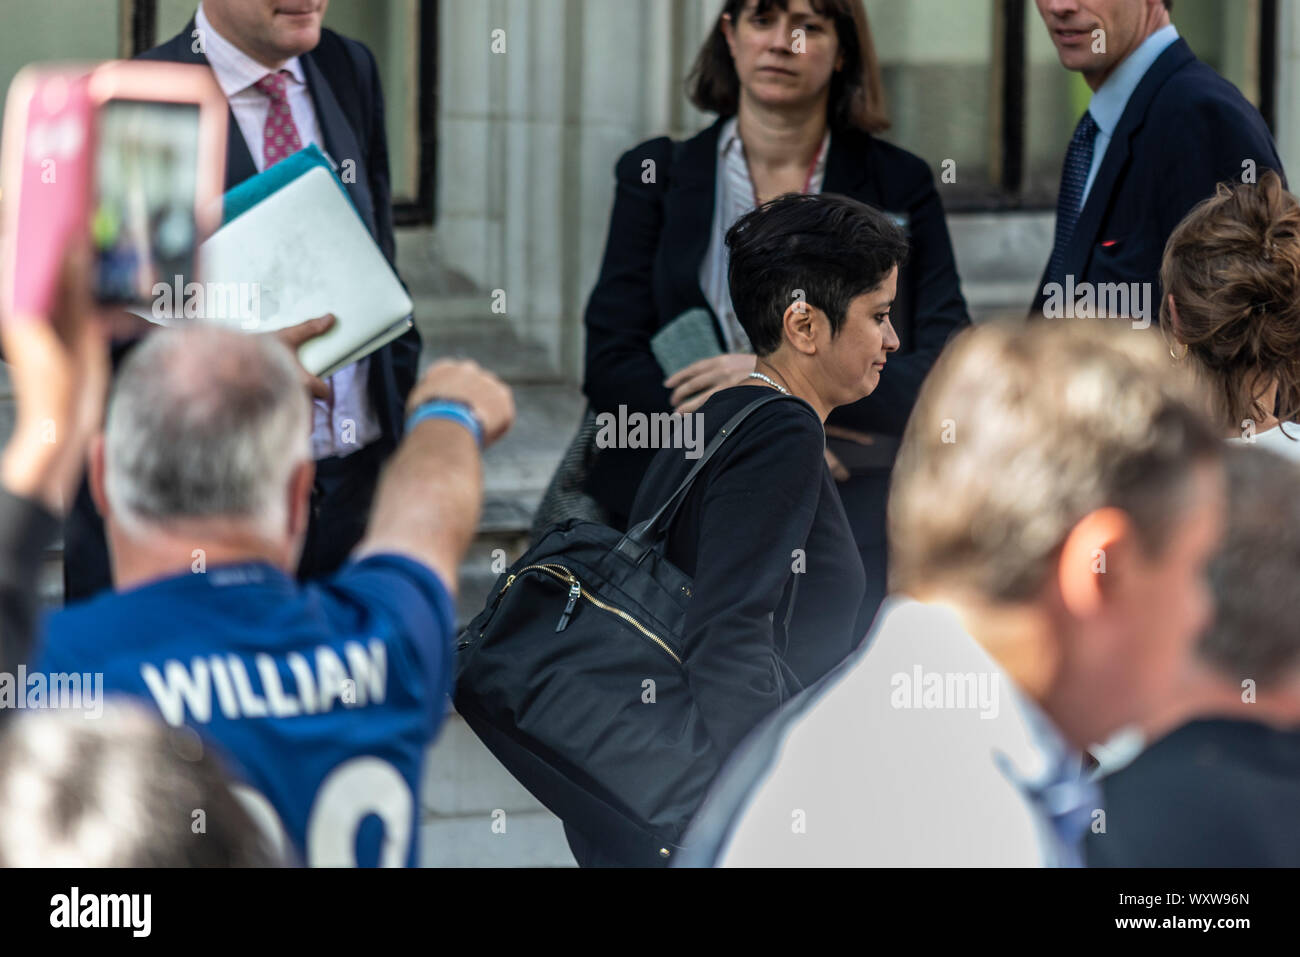 Baroness Chakrabarti, Shami Chakrabarti,outside the Supreme Court of the UK in Westminster, London, UK being berated by pro Brexit protesters Stock Photo